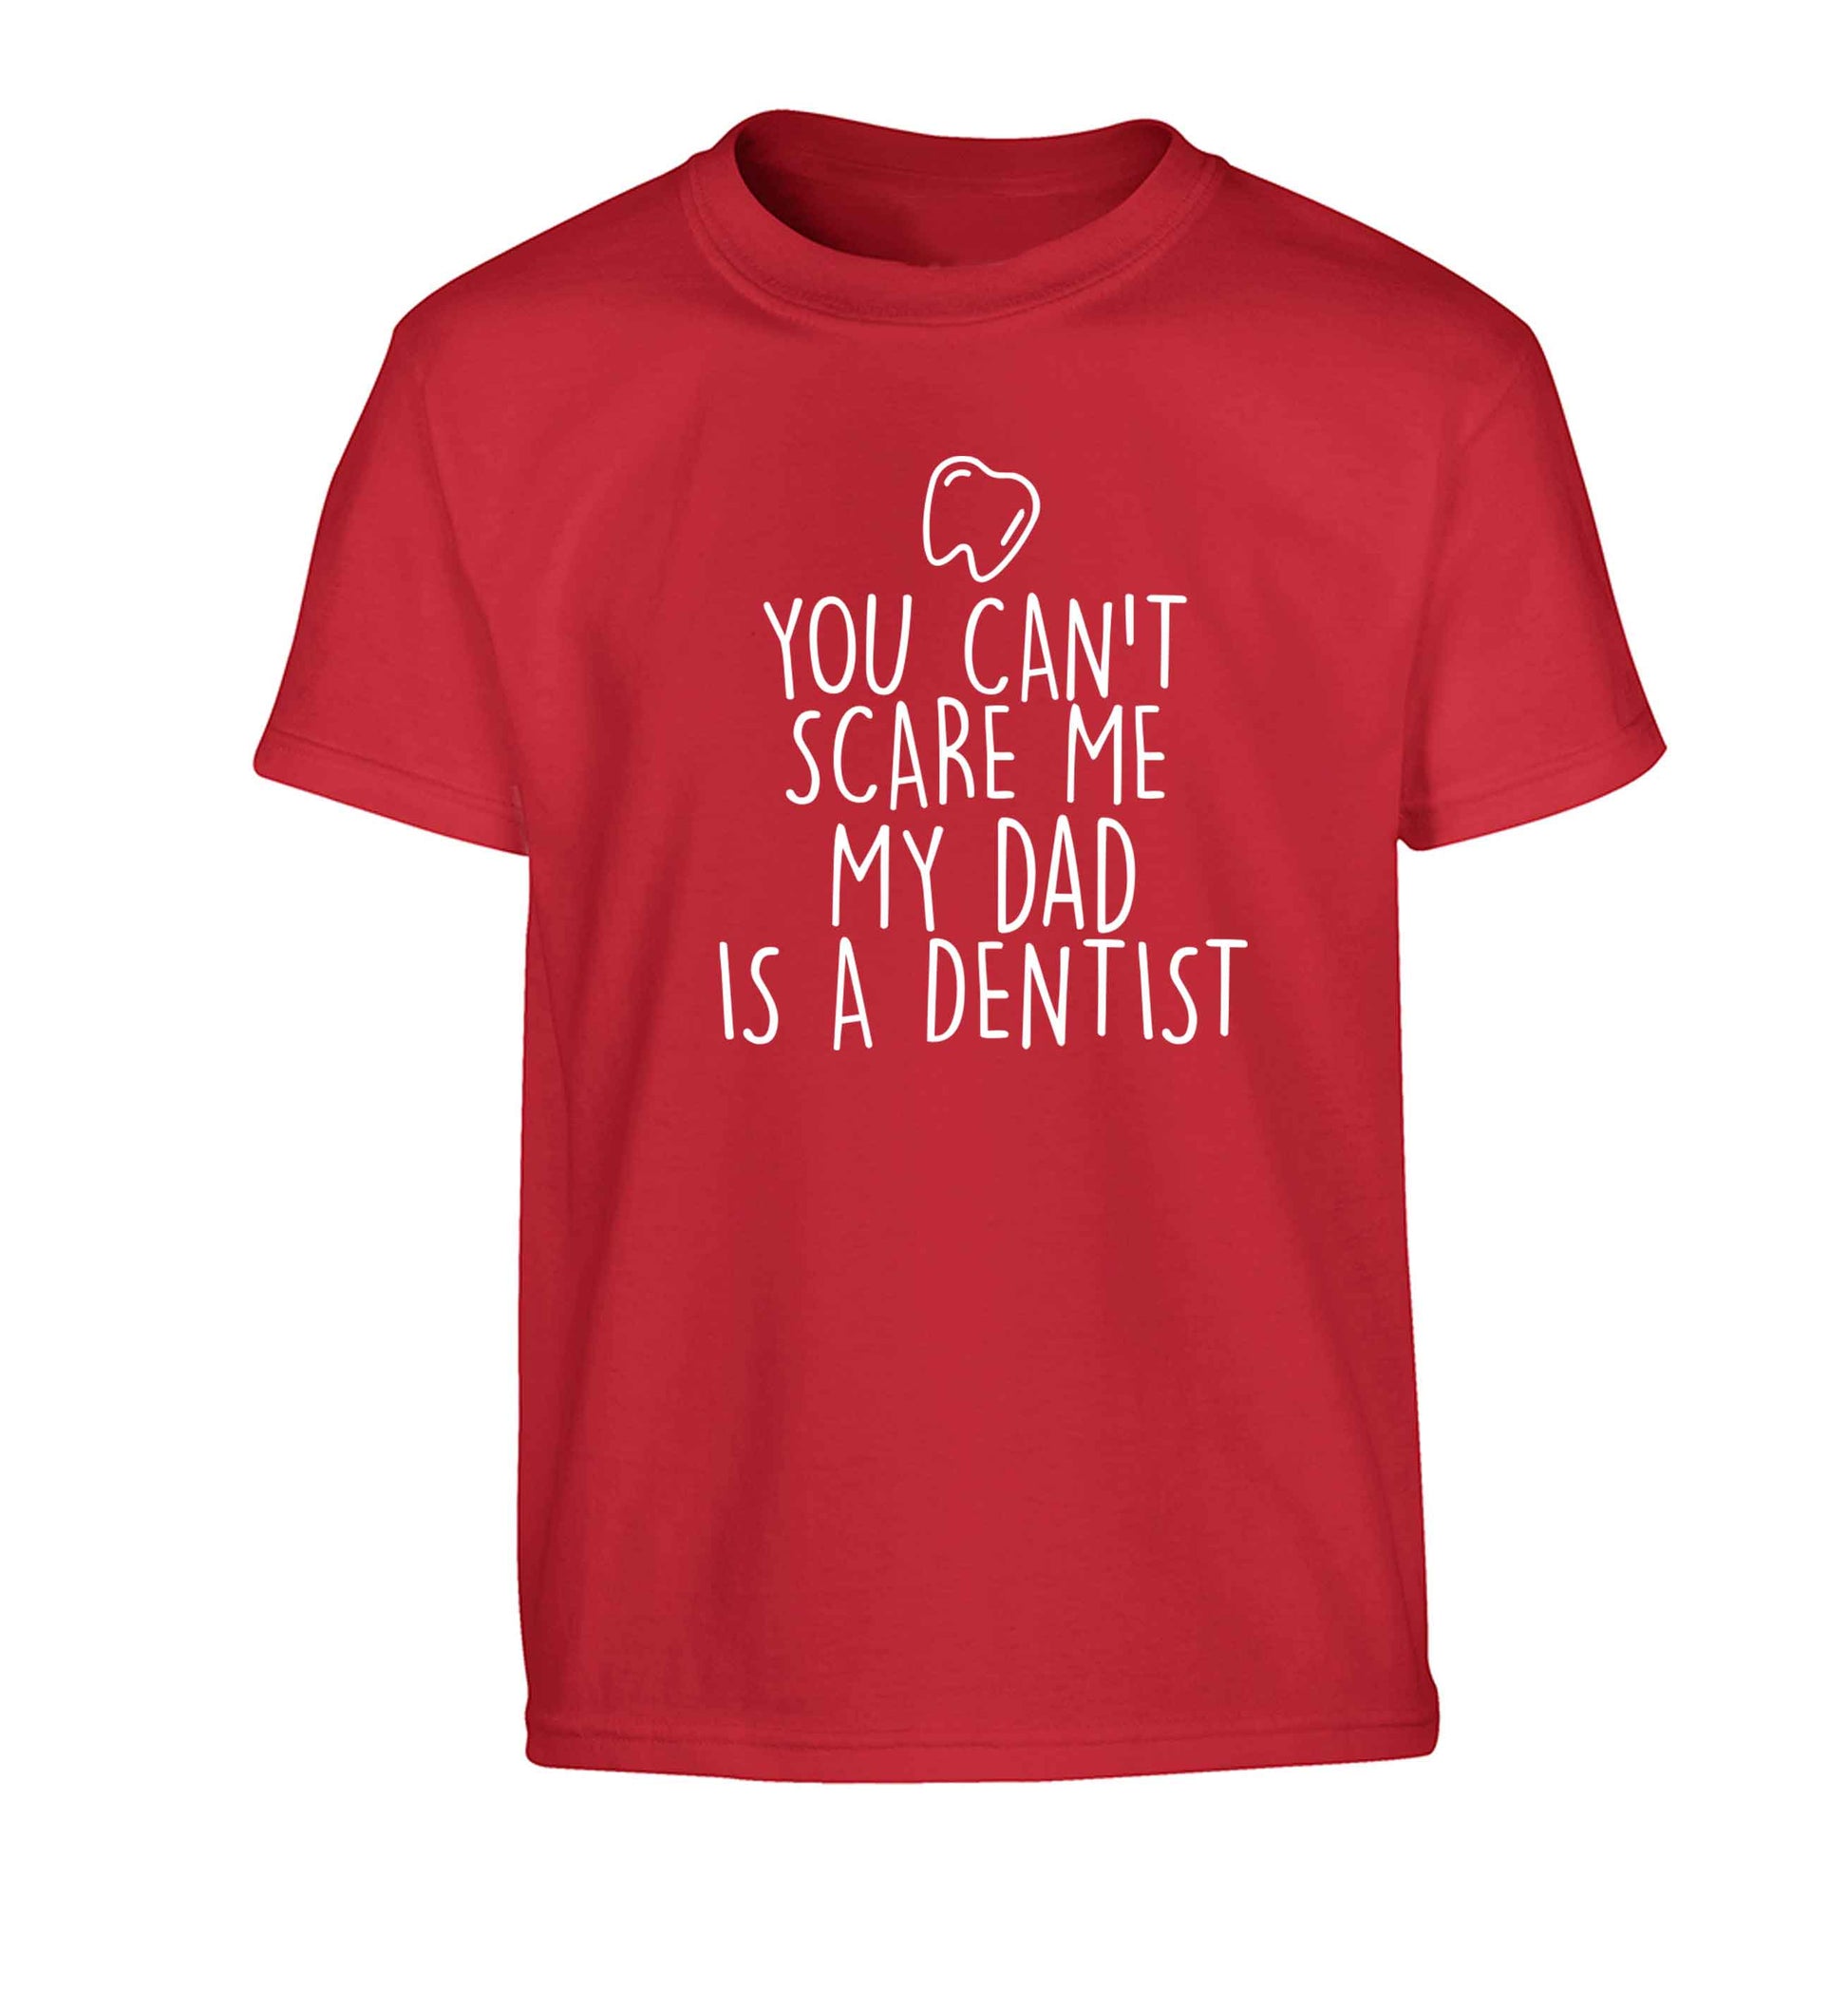 You can't scare me my dad is a dentist Children's red Tshirt 12-13 Years